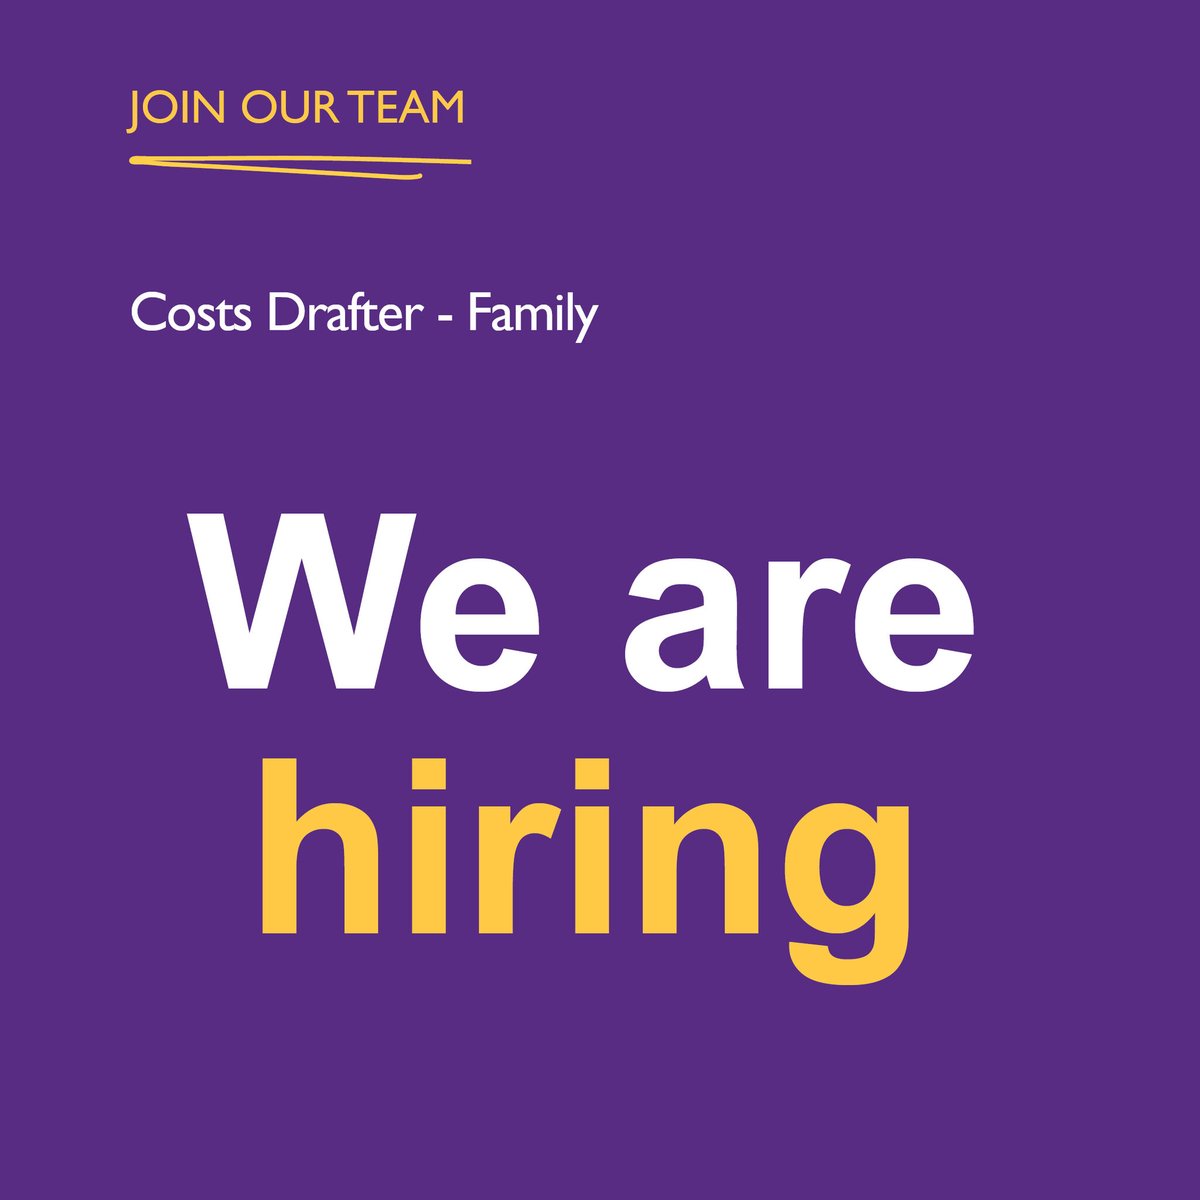 We’re #hiring ❗

📝 #CostsDrafter
🤝 Family
📍 #NewtonAbbot
📆 31st May

To find out more and to apply, click here 👇
tozers.co.uk/careers/vacanc…

#job #career #law #solicitors #jobsearch #recruitment #careerdevelopment #nowhiring #jobseekers #recruiting